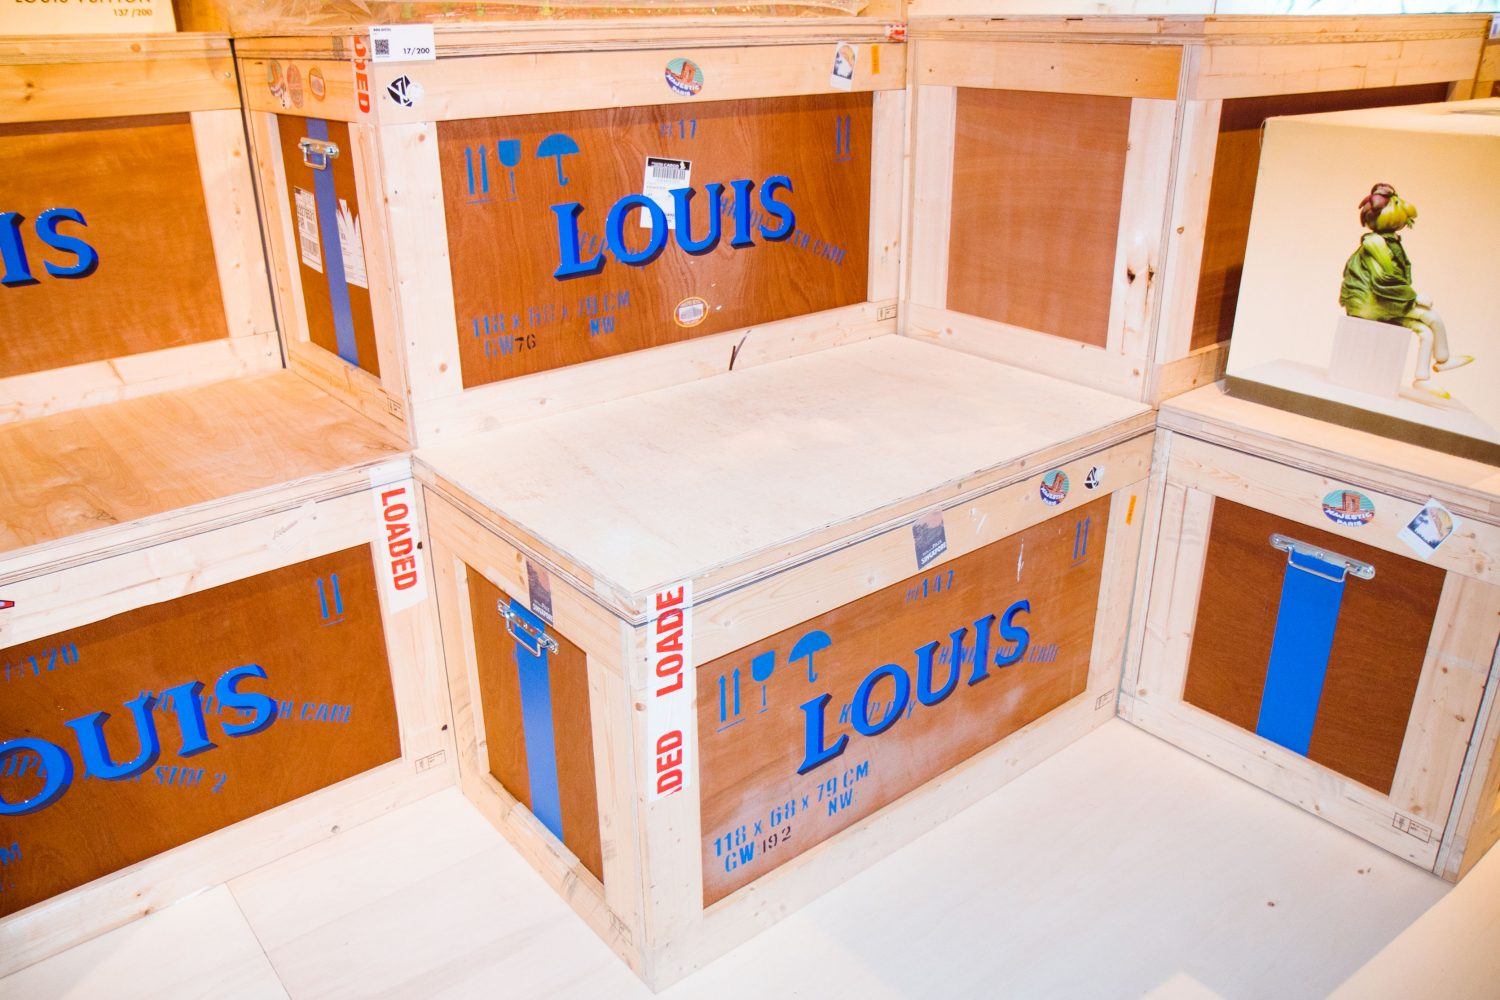 Louis Vuitton's exhibition FULL TOUR “200 TRUNKS, 200 VISIONARIES: THE  EXHIBITION” NEW YORK 